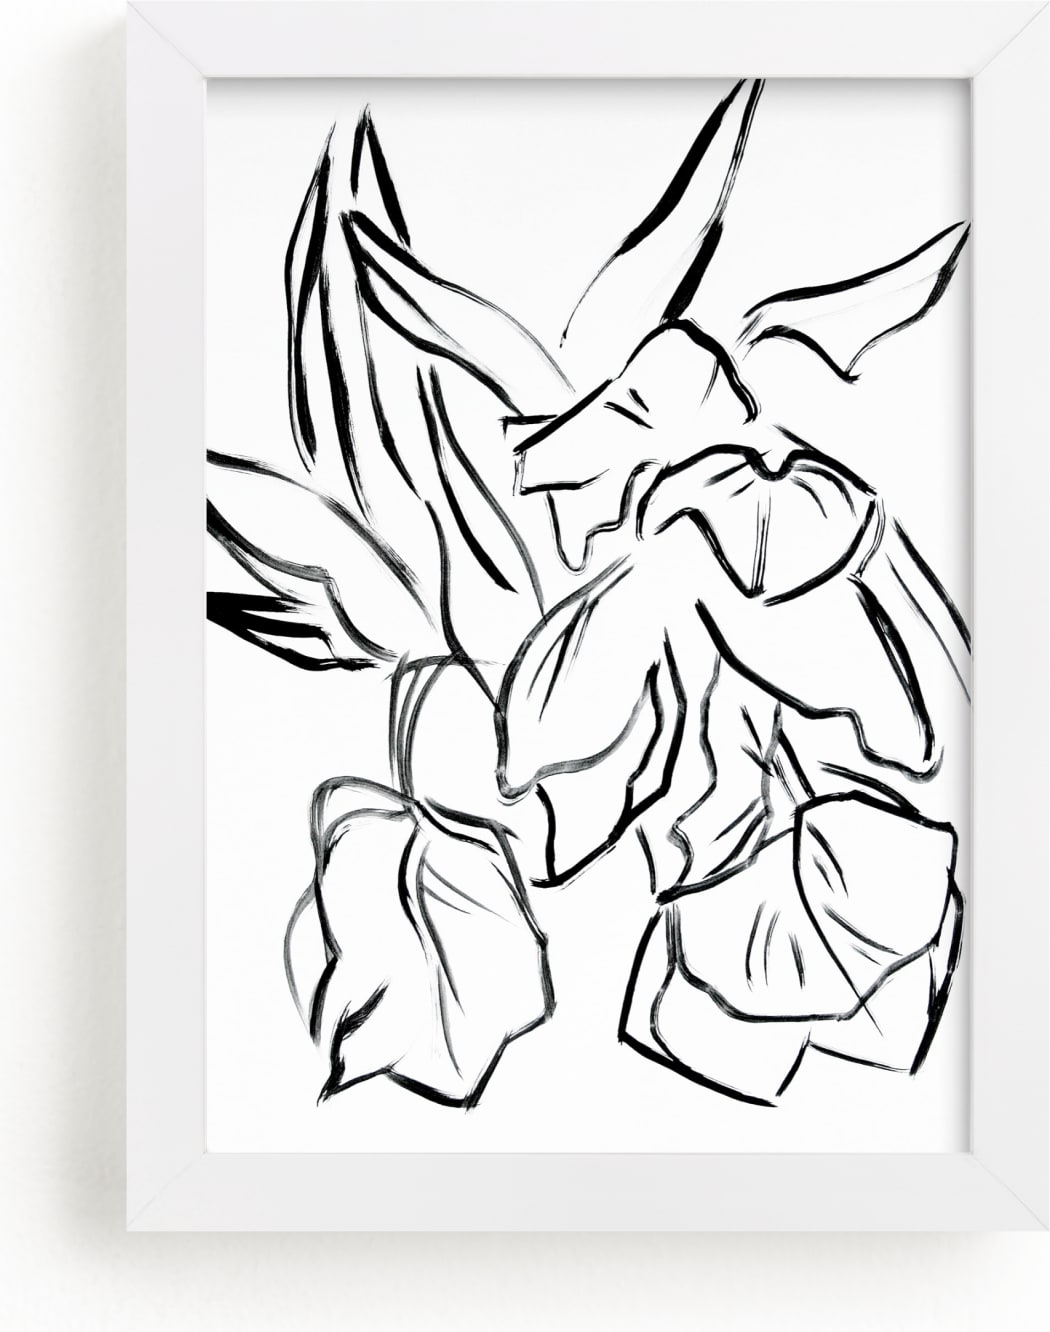 This is a black and white art by Lynne Millar called Parrot Tulips.